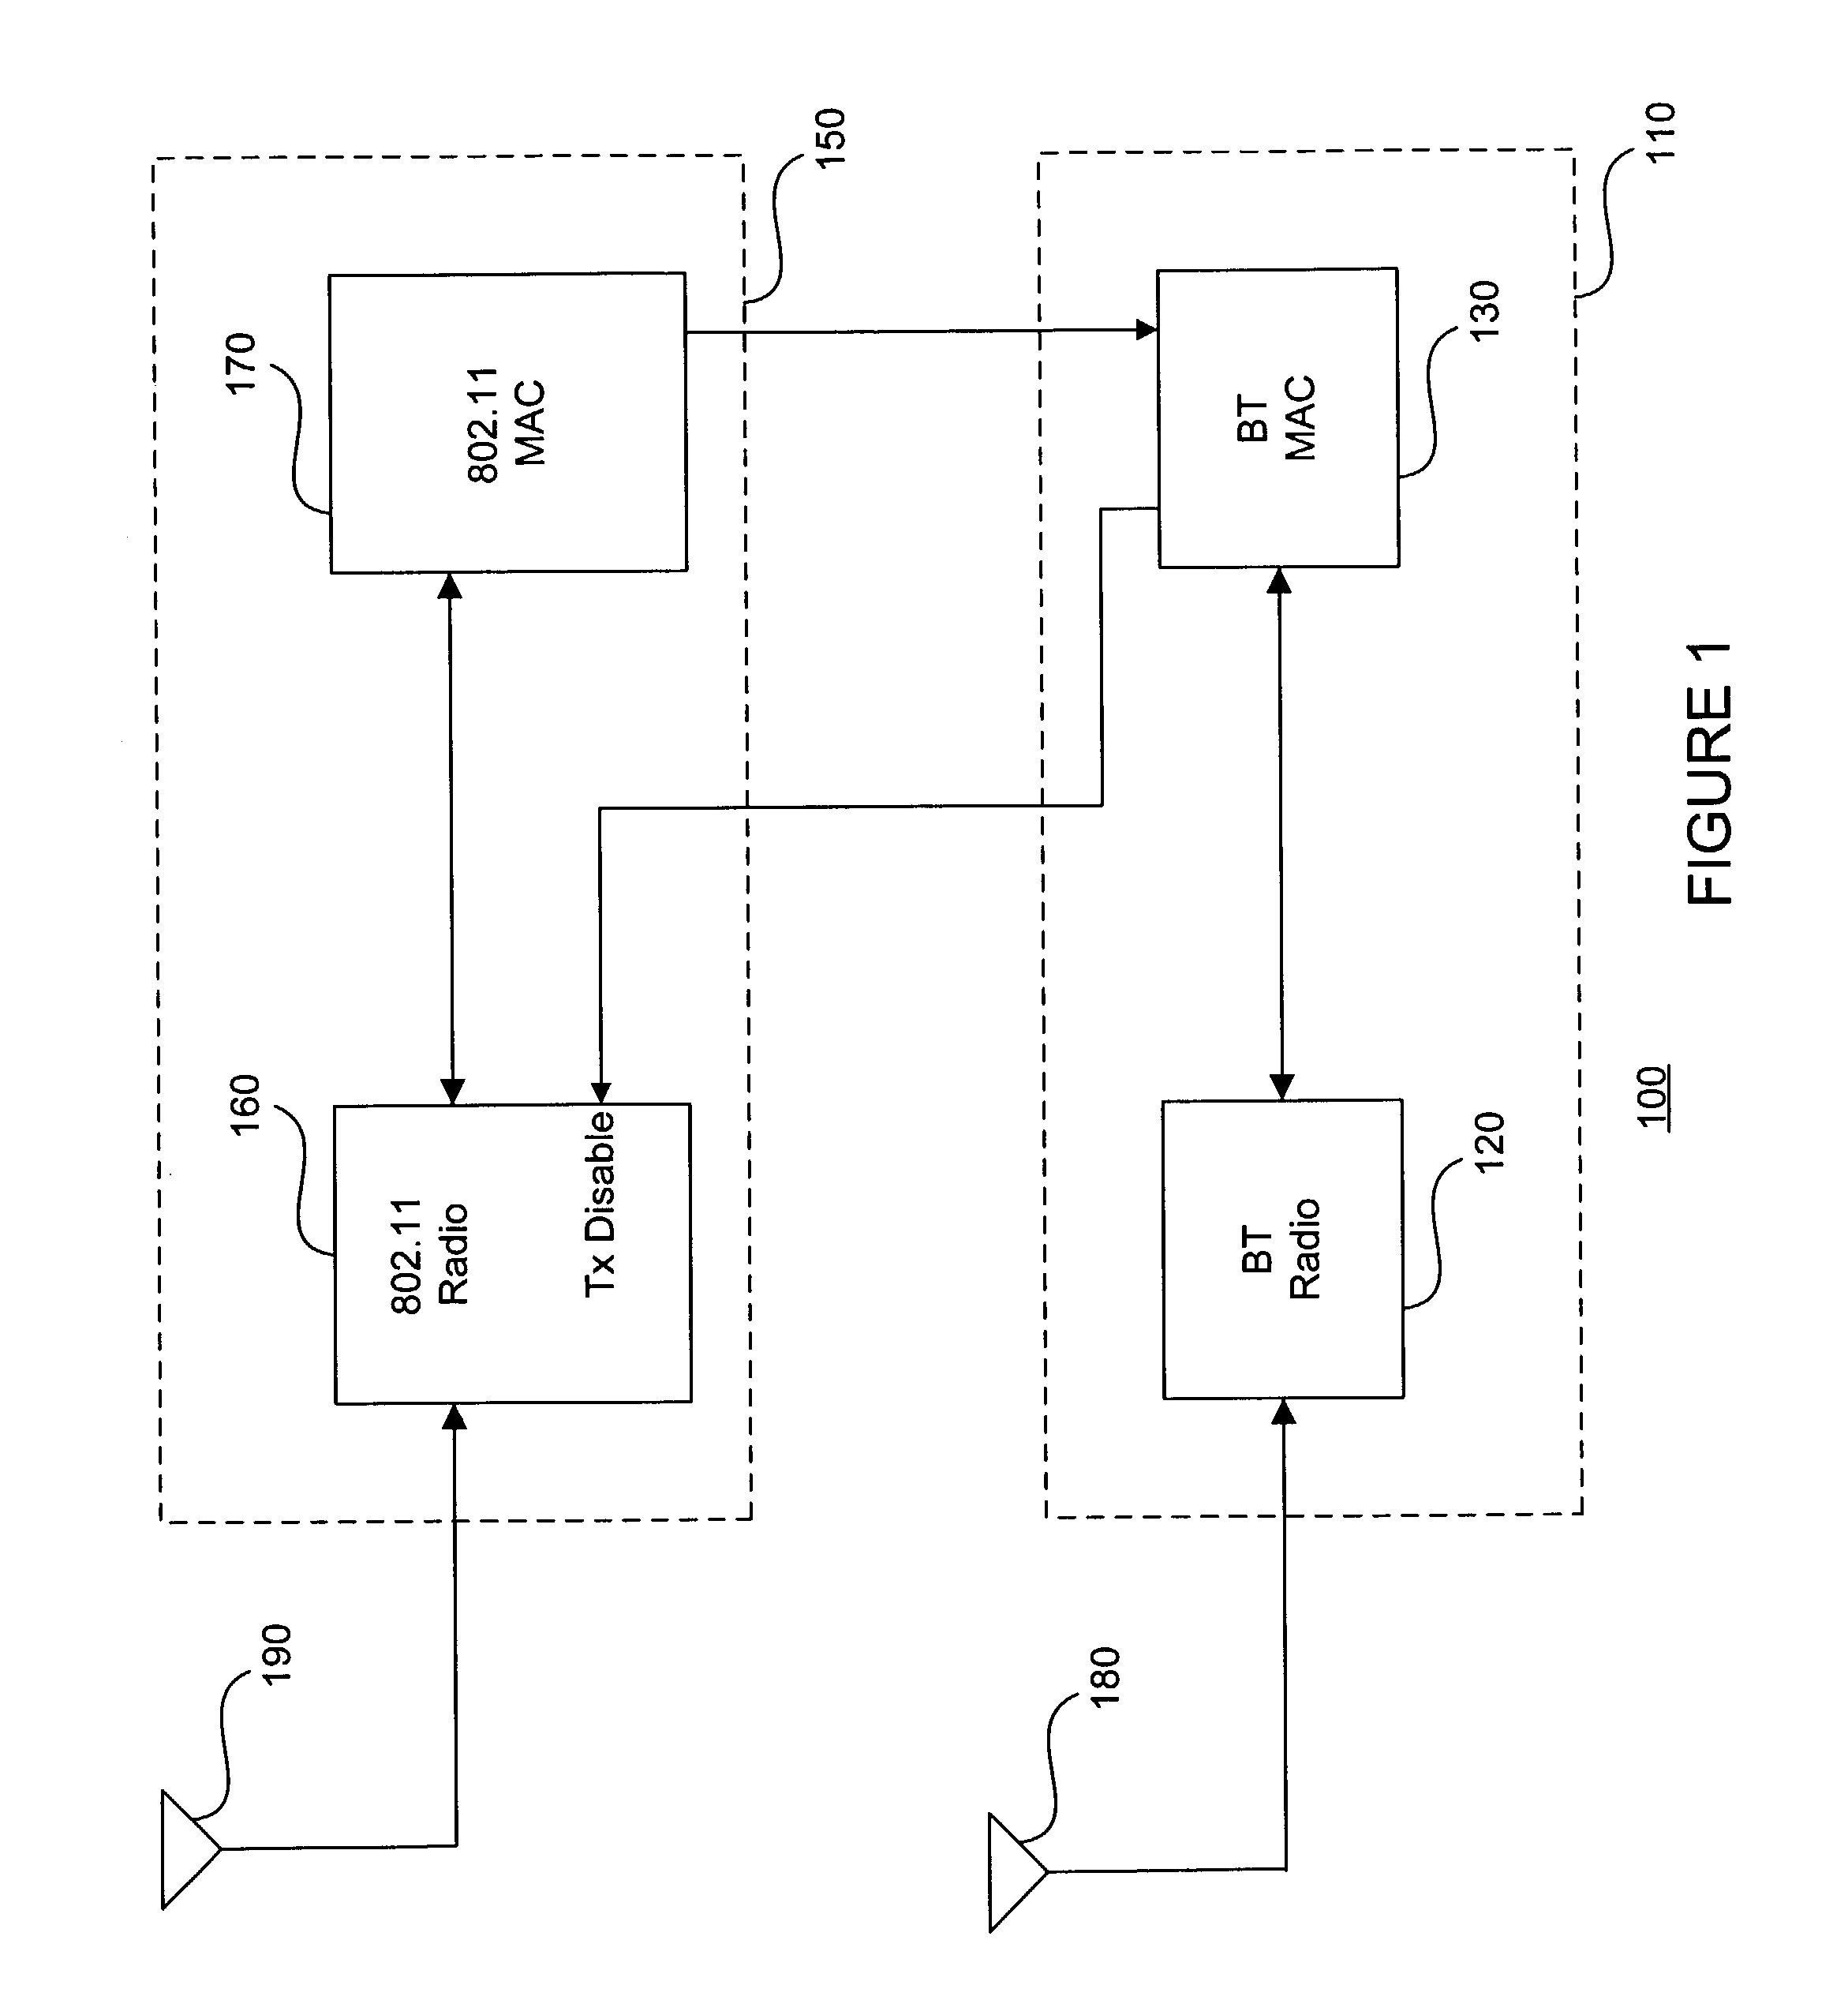 Method and apparatus for a dual-mode radio in a wireless communication system